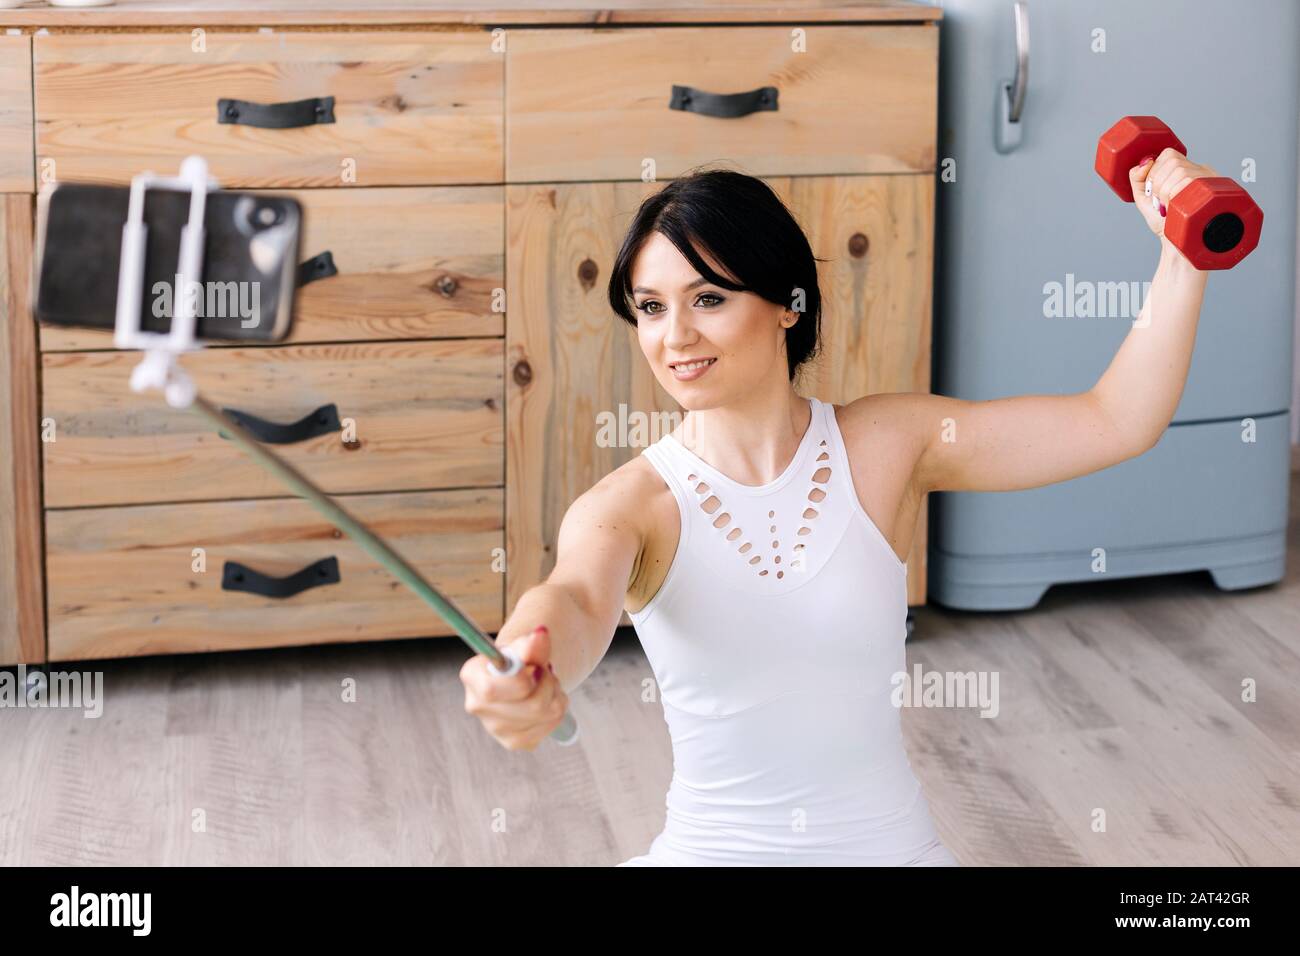 A positive woman taking selfie on cellphone during workout Stock Photo